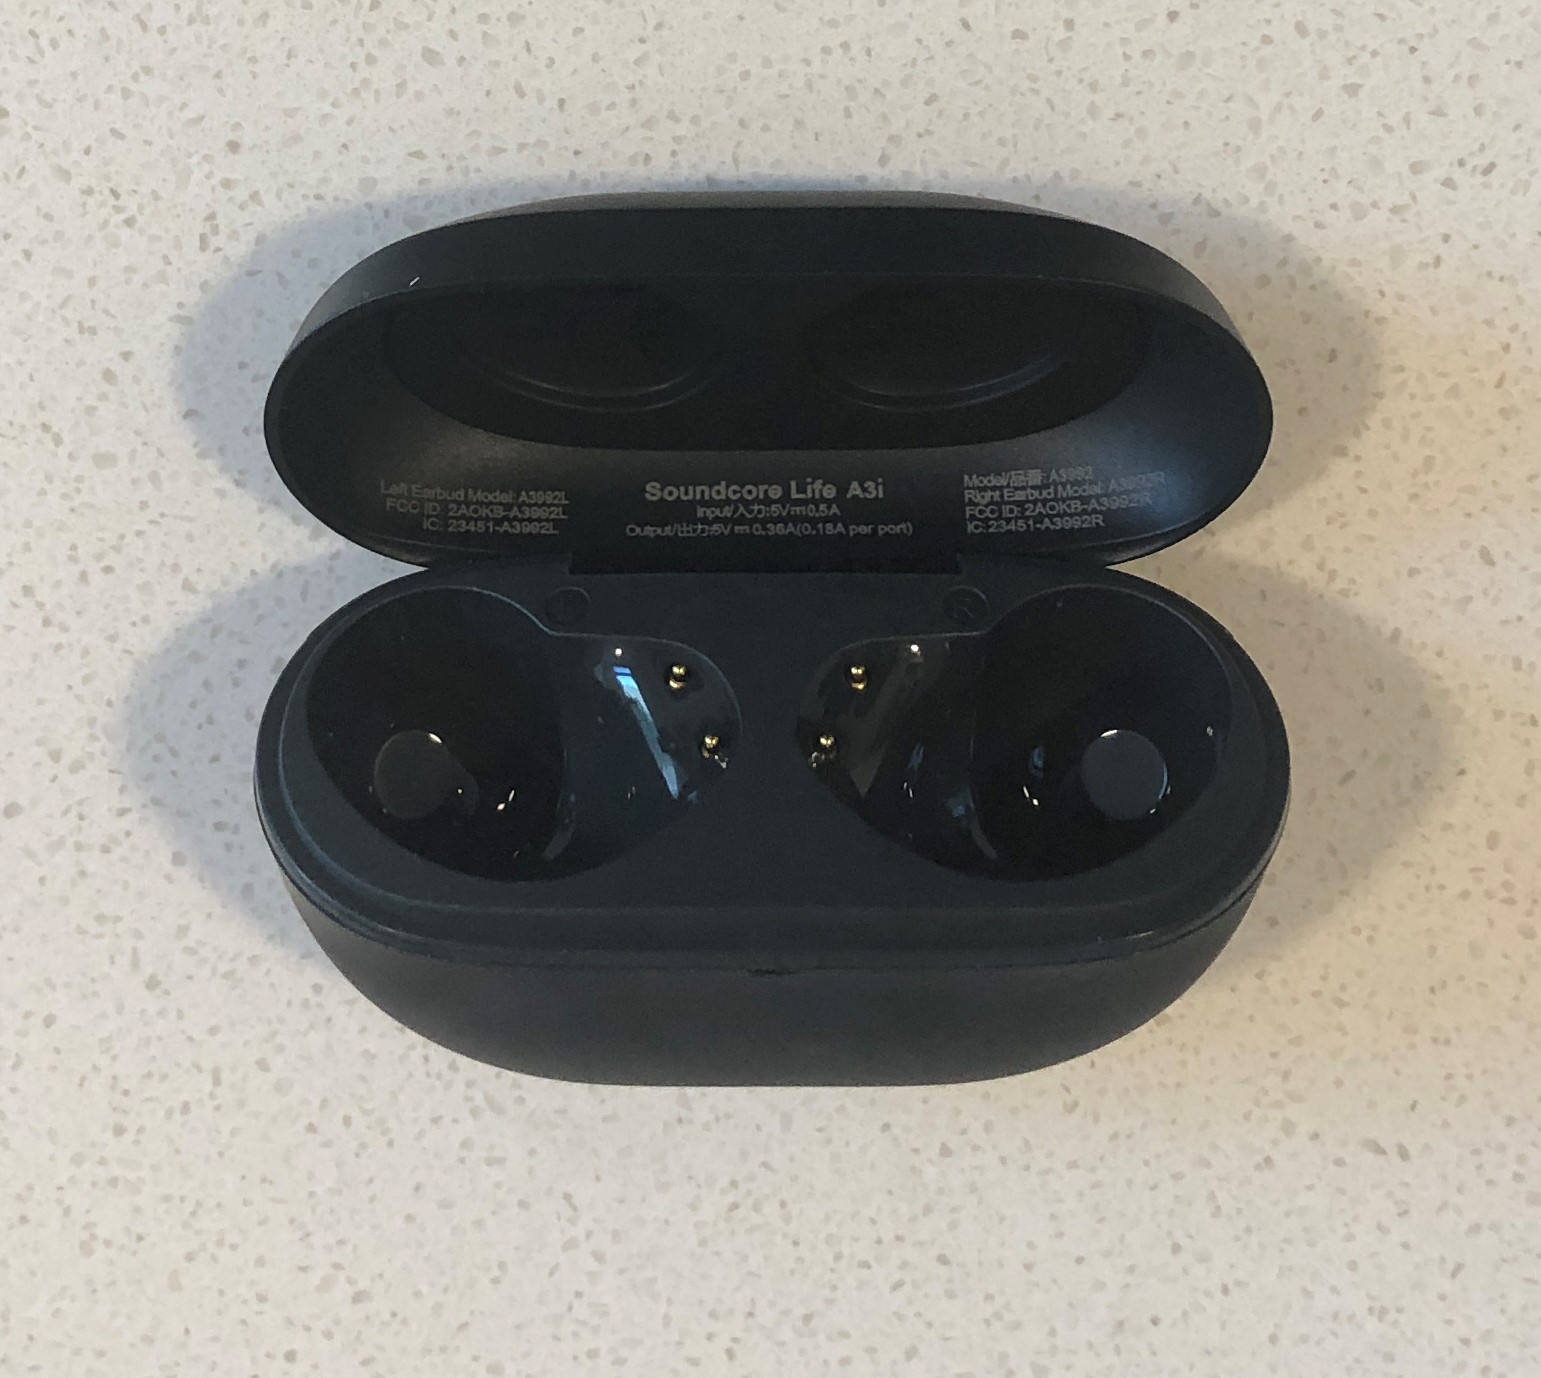 Soundcore Life A3i earbud charging and carrying case inside